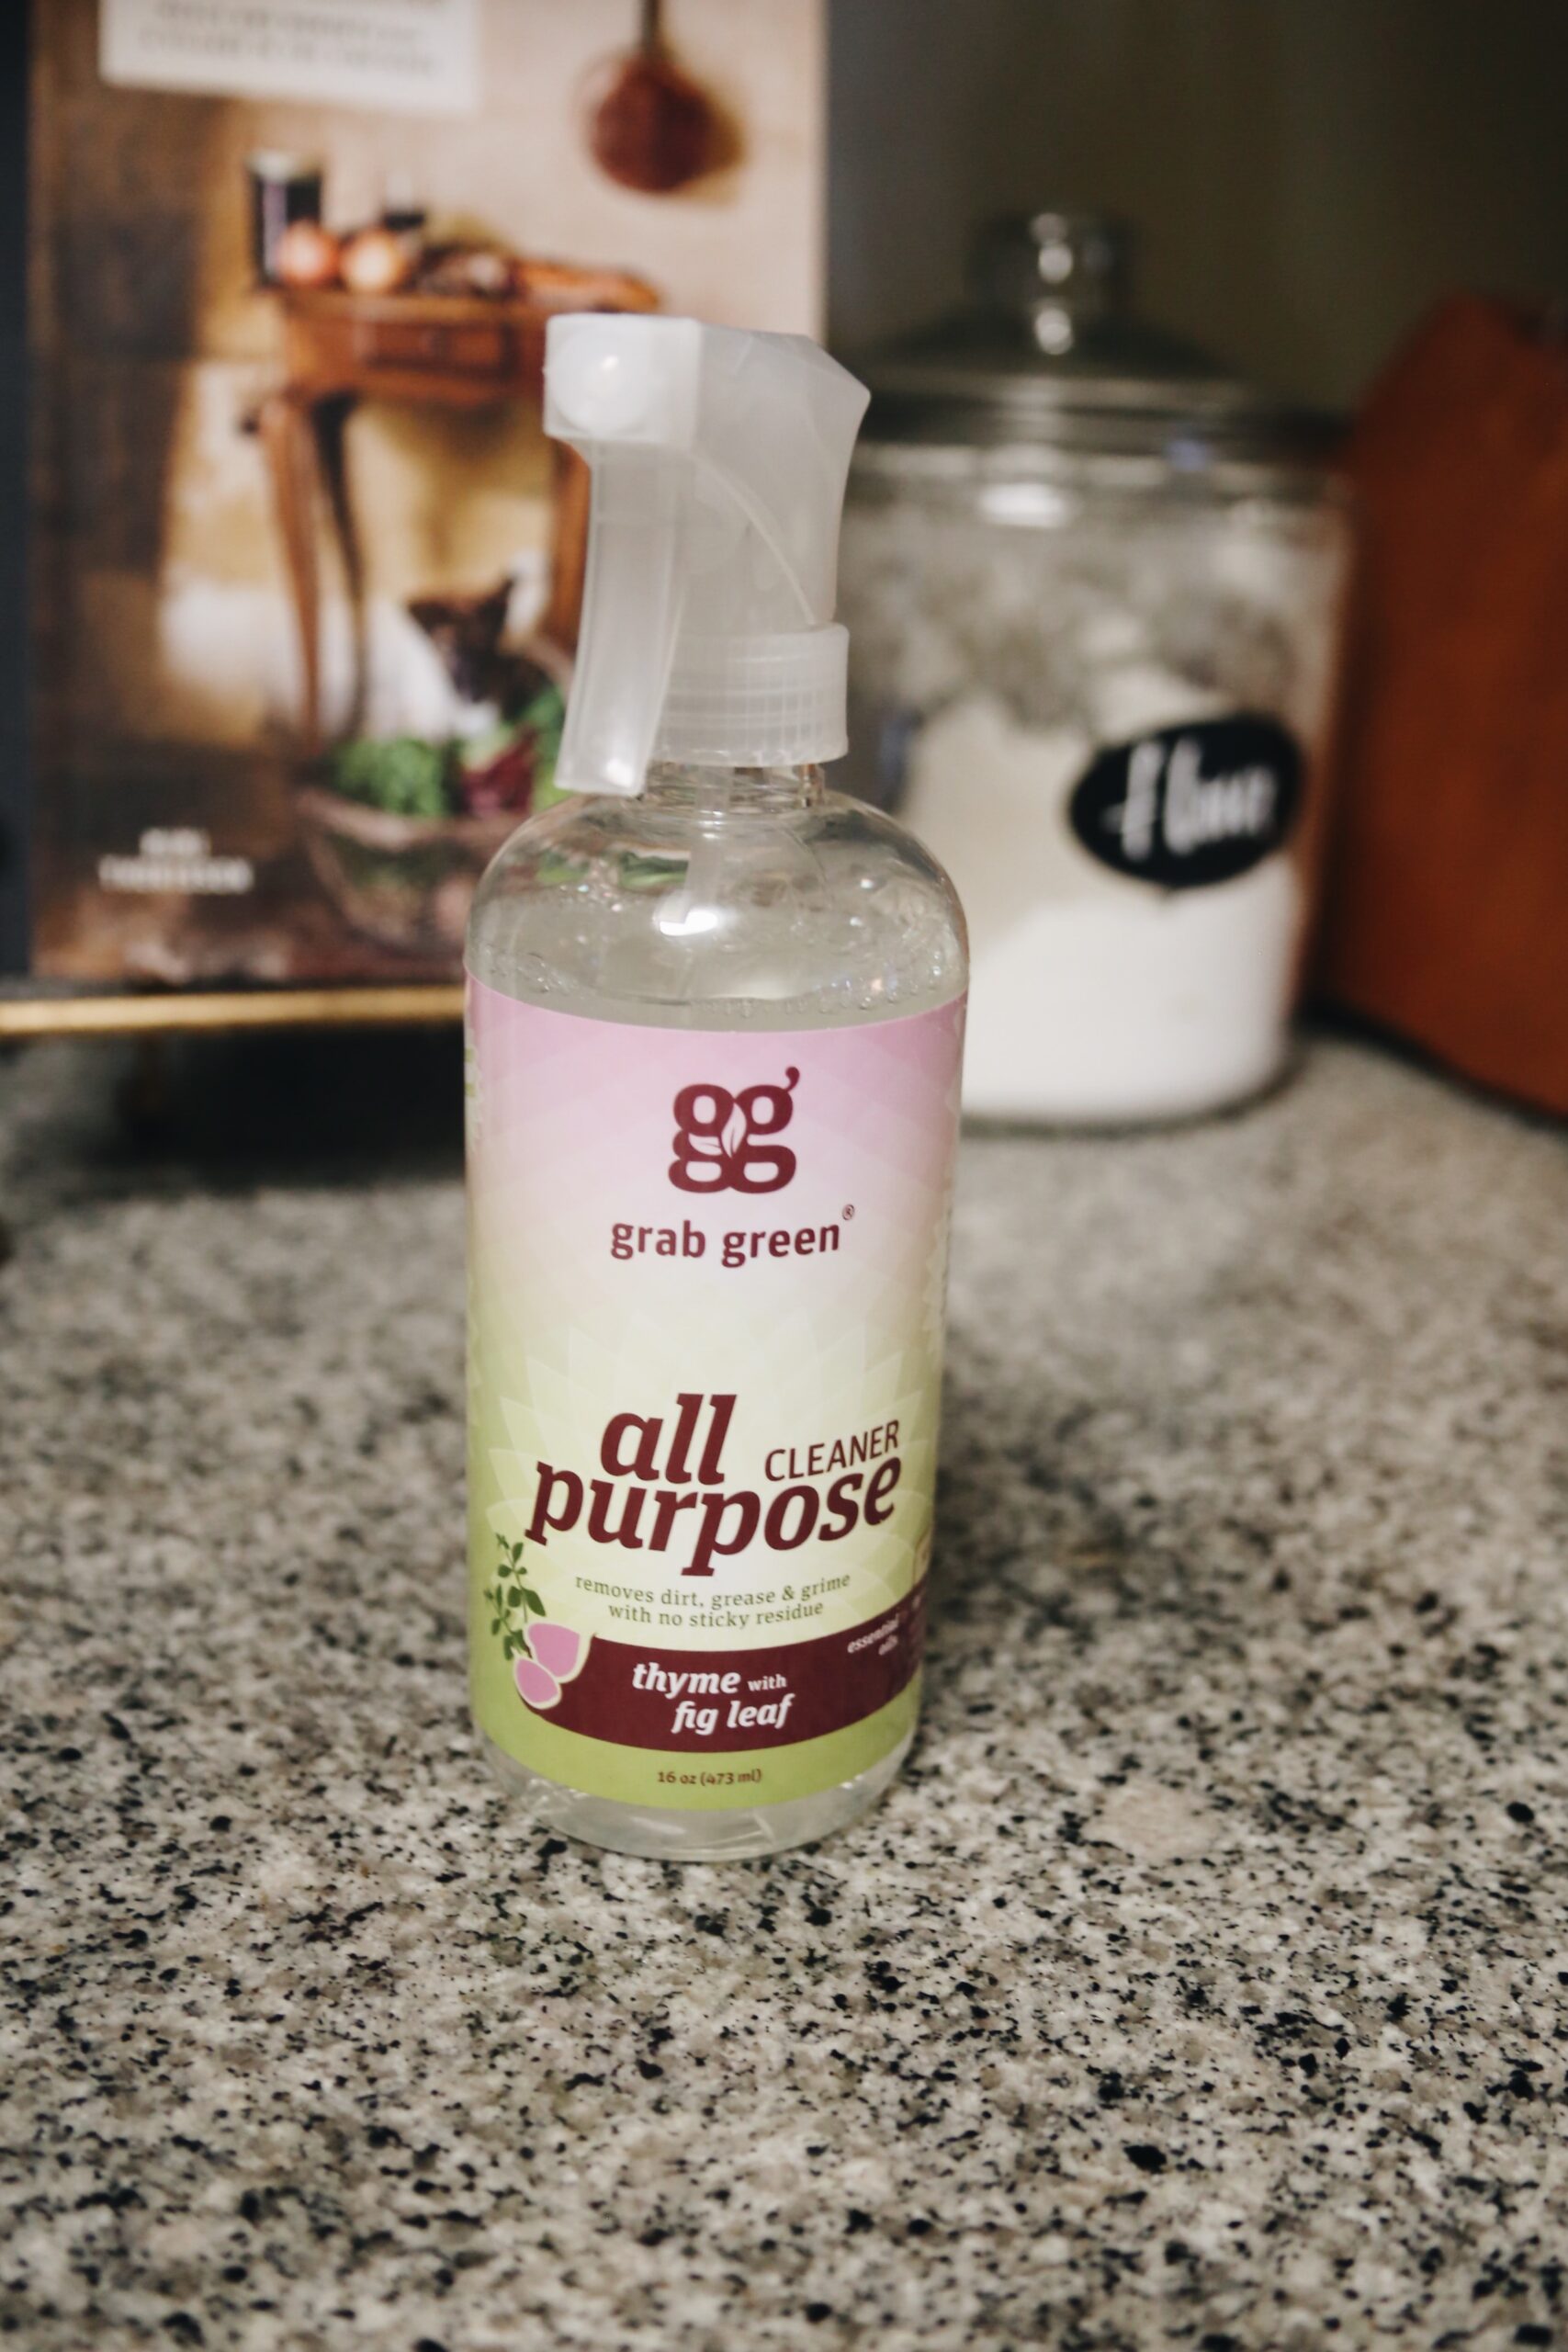  The term "all-purpose" is so so true. I use this on my countertops, as a dusting spray, I use it on my refrigerator to fix smudge marks. Better than wipes, faster drying and non-toxic. 